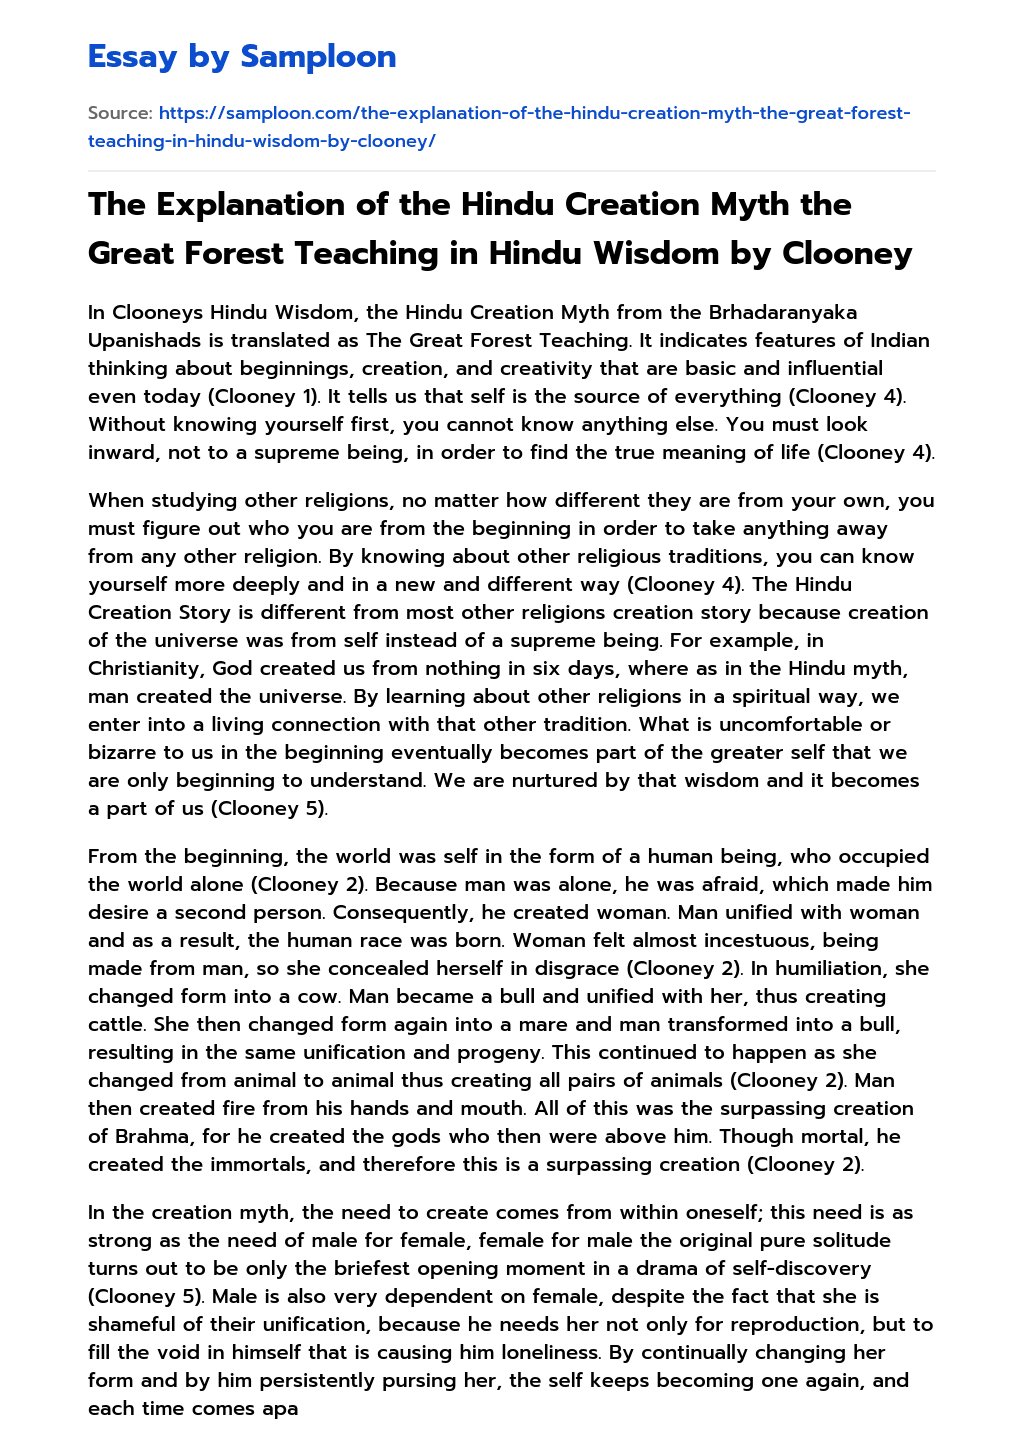 The Explanation of the Hindu Creation Myth the Great Forest Teaching in Hindu Wisdom by Clooney essay